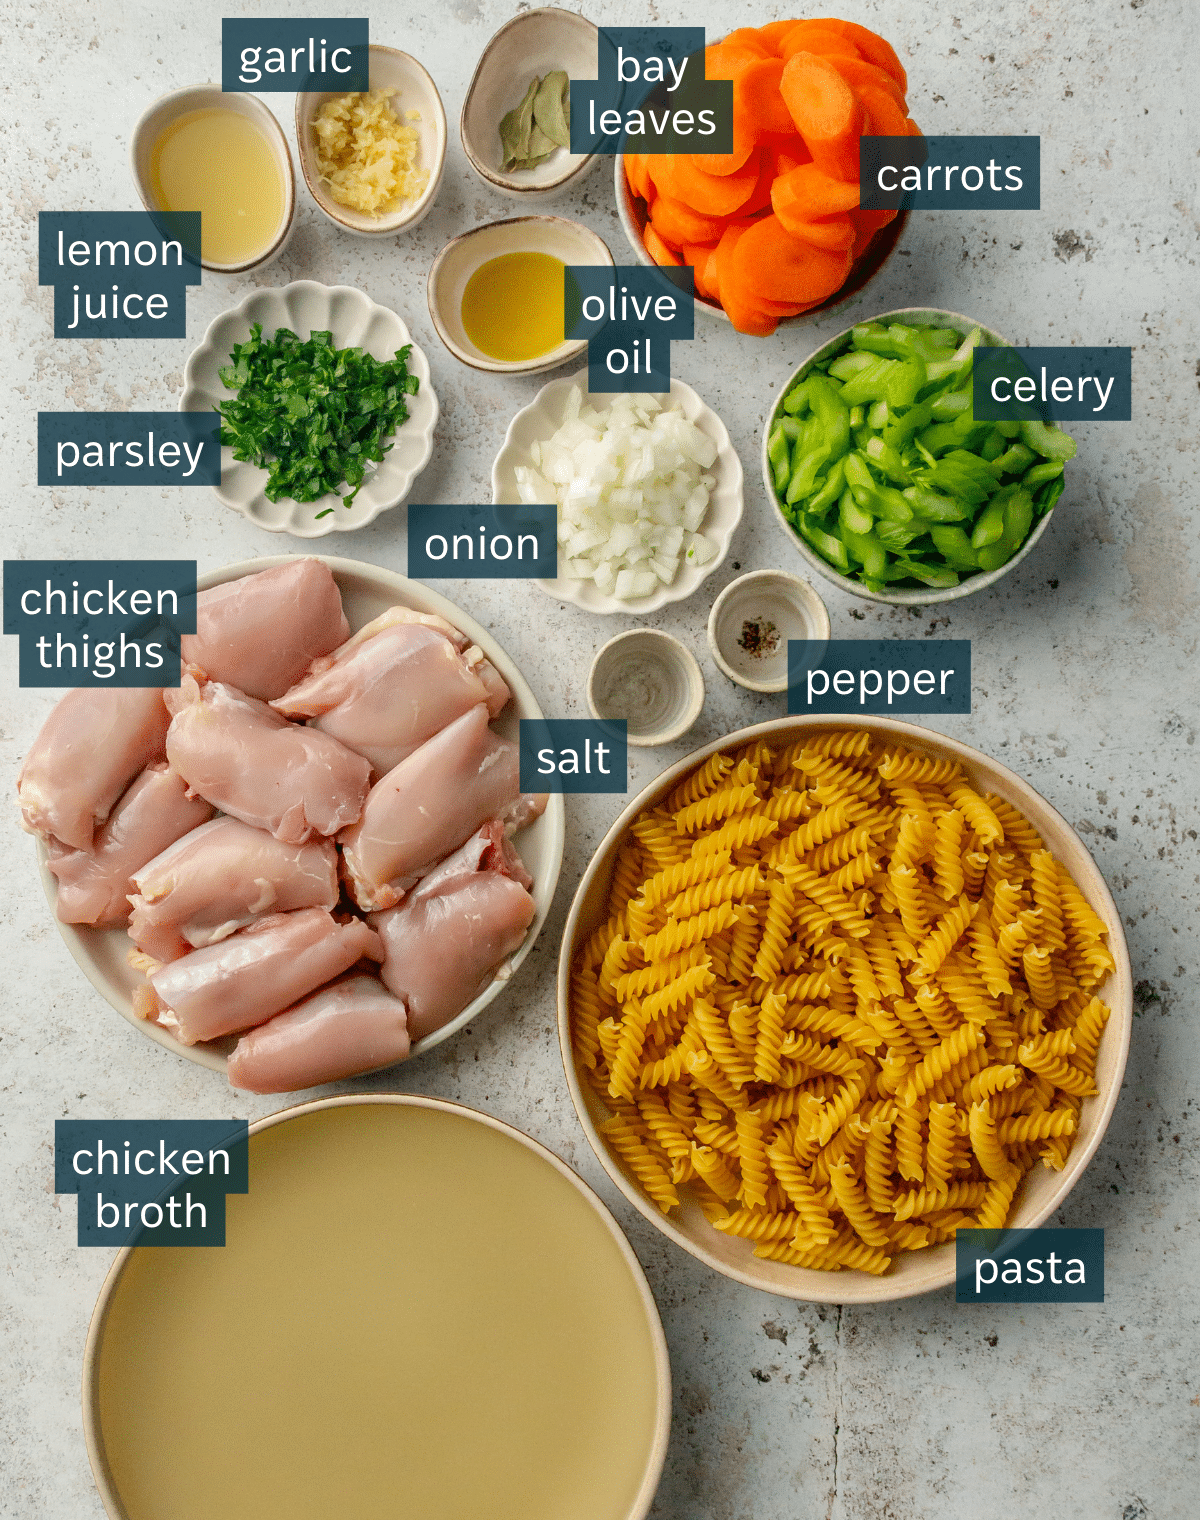 All of the ingredients for homemade chicken noodle soup in different sized bowls and plates on a light gray surface.